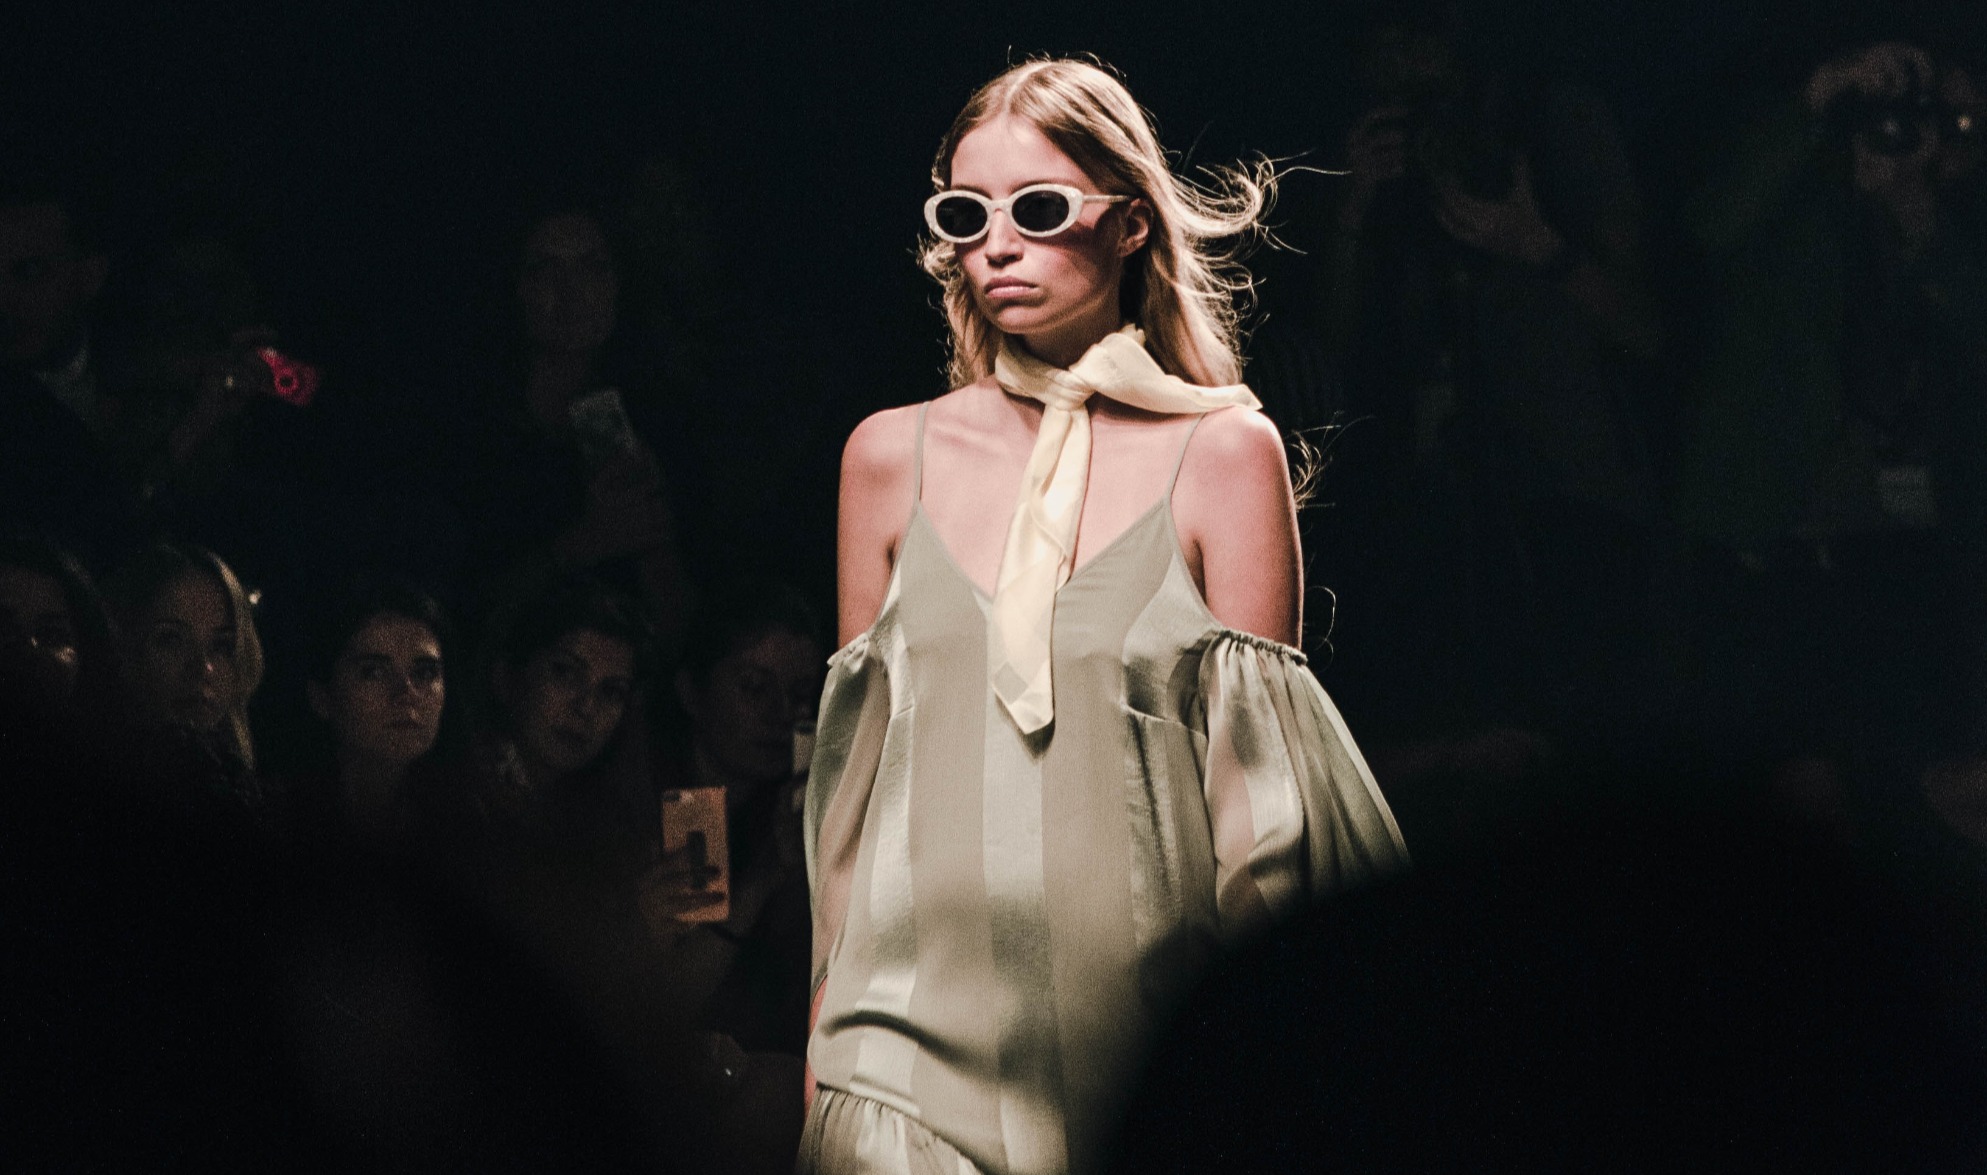 A grumpy looking fahsion model in large sunglasses and a beige dress walks down a catwalk